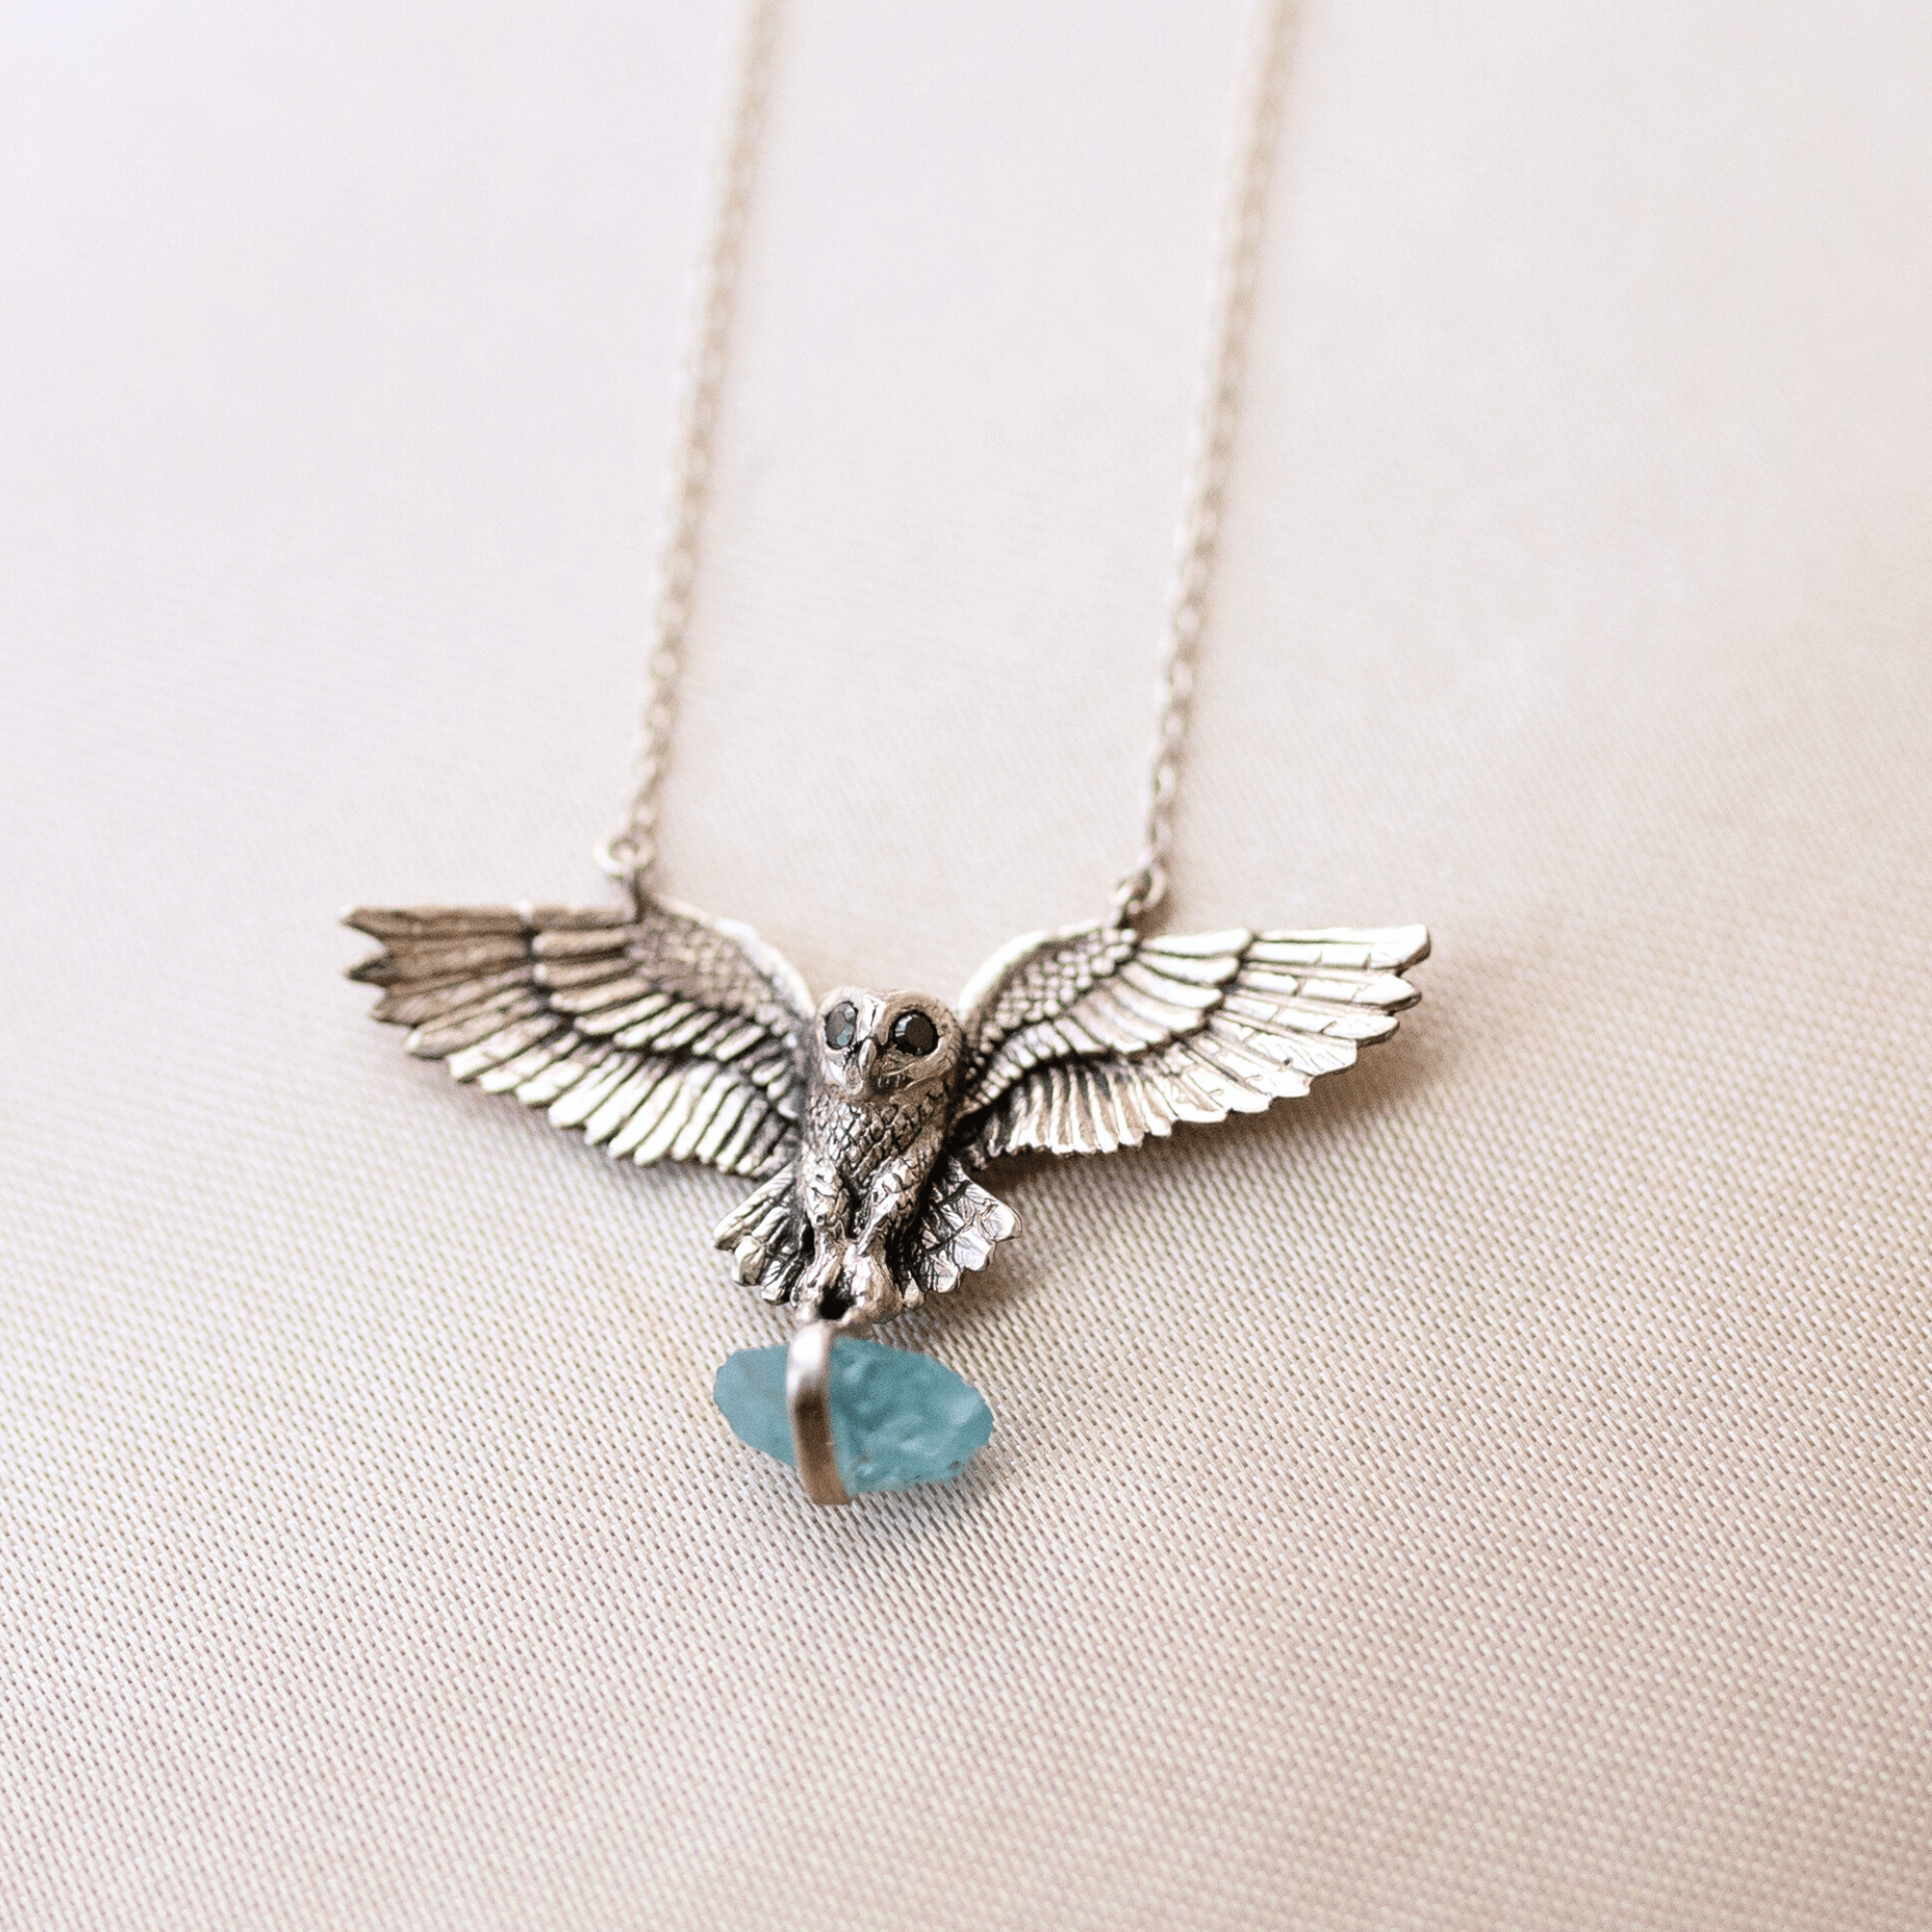 Jewelry Evolution Necklace Sterling Silver Owl "Wisdom & Truth" Necklace with Black Diamond and Apatite